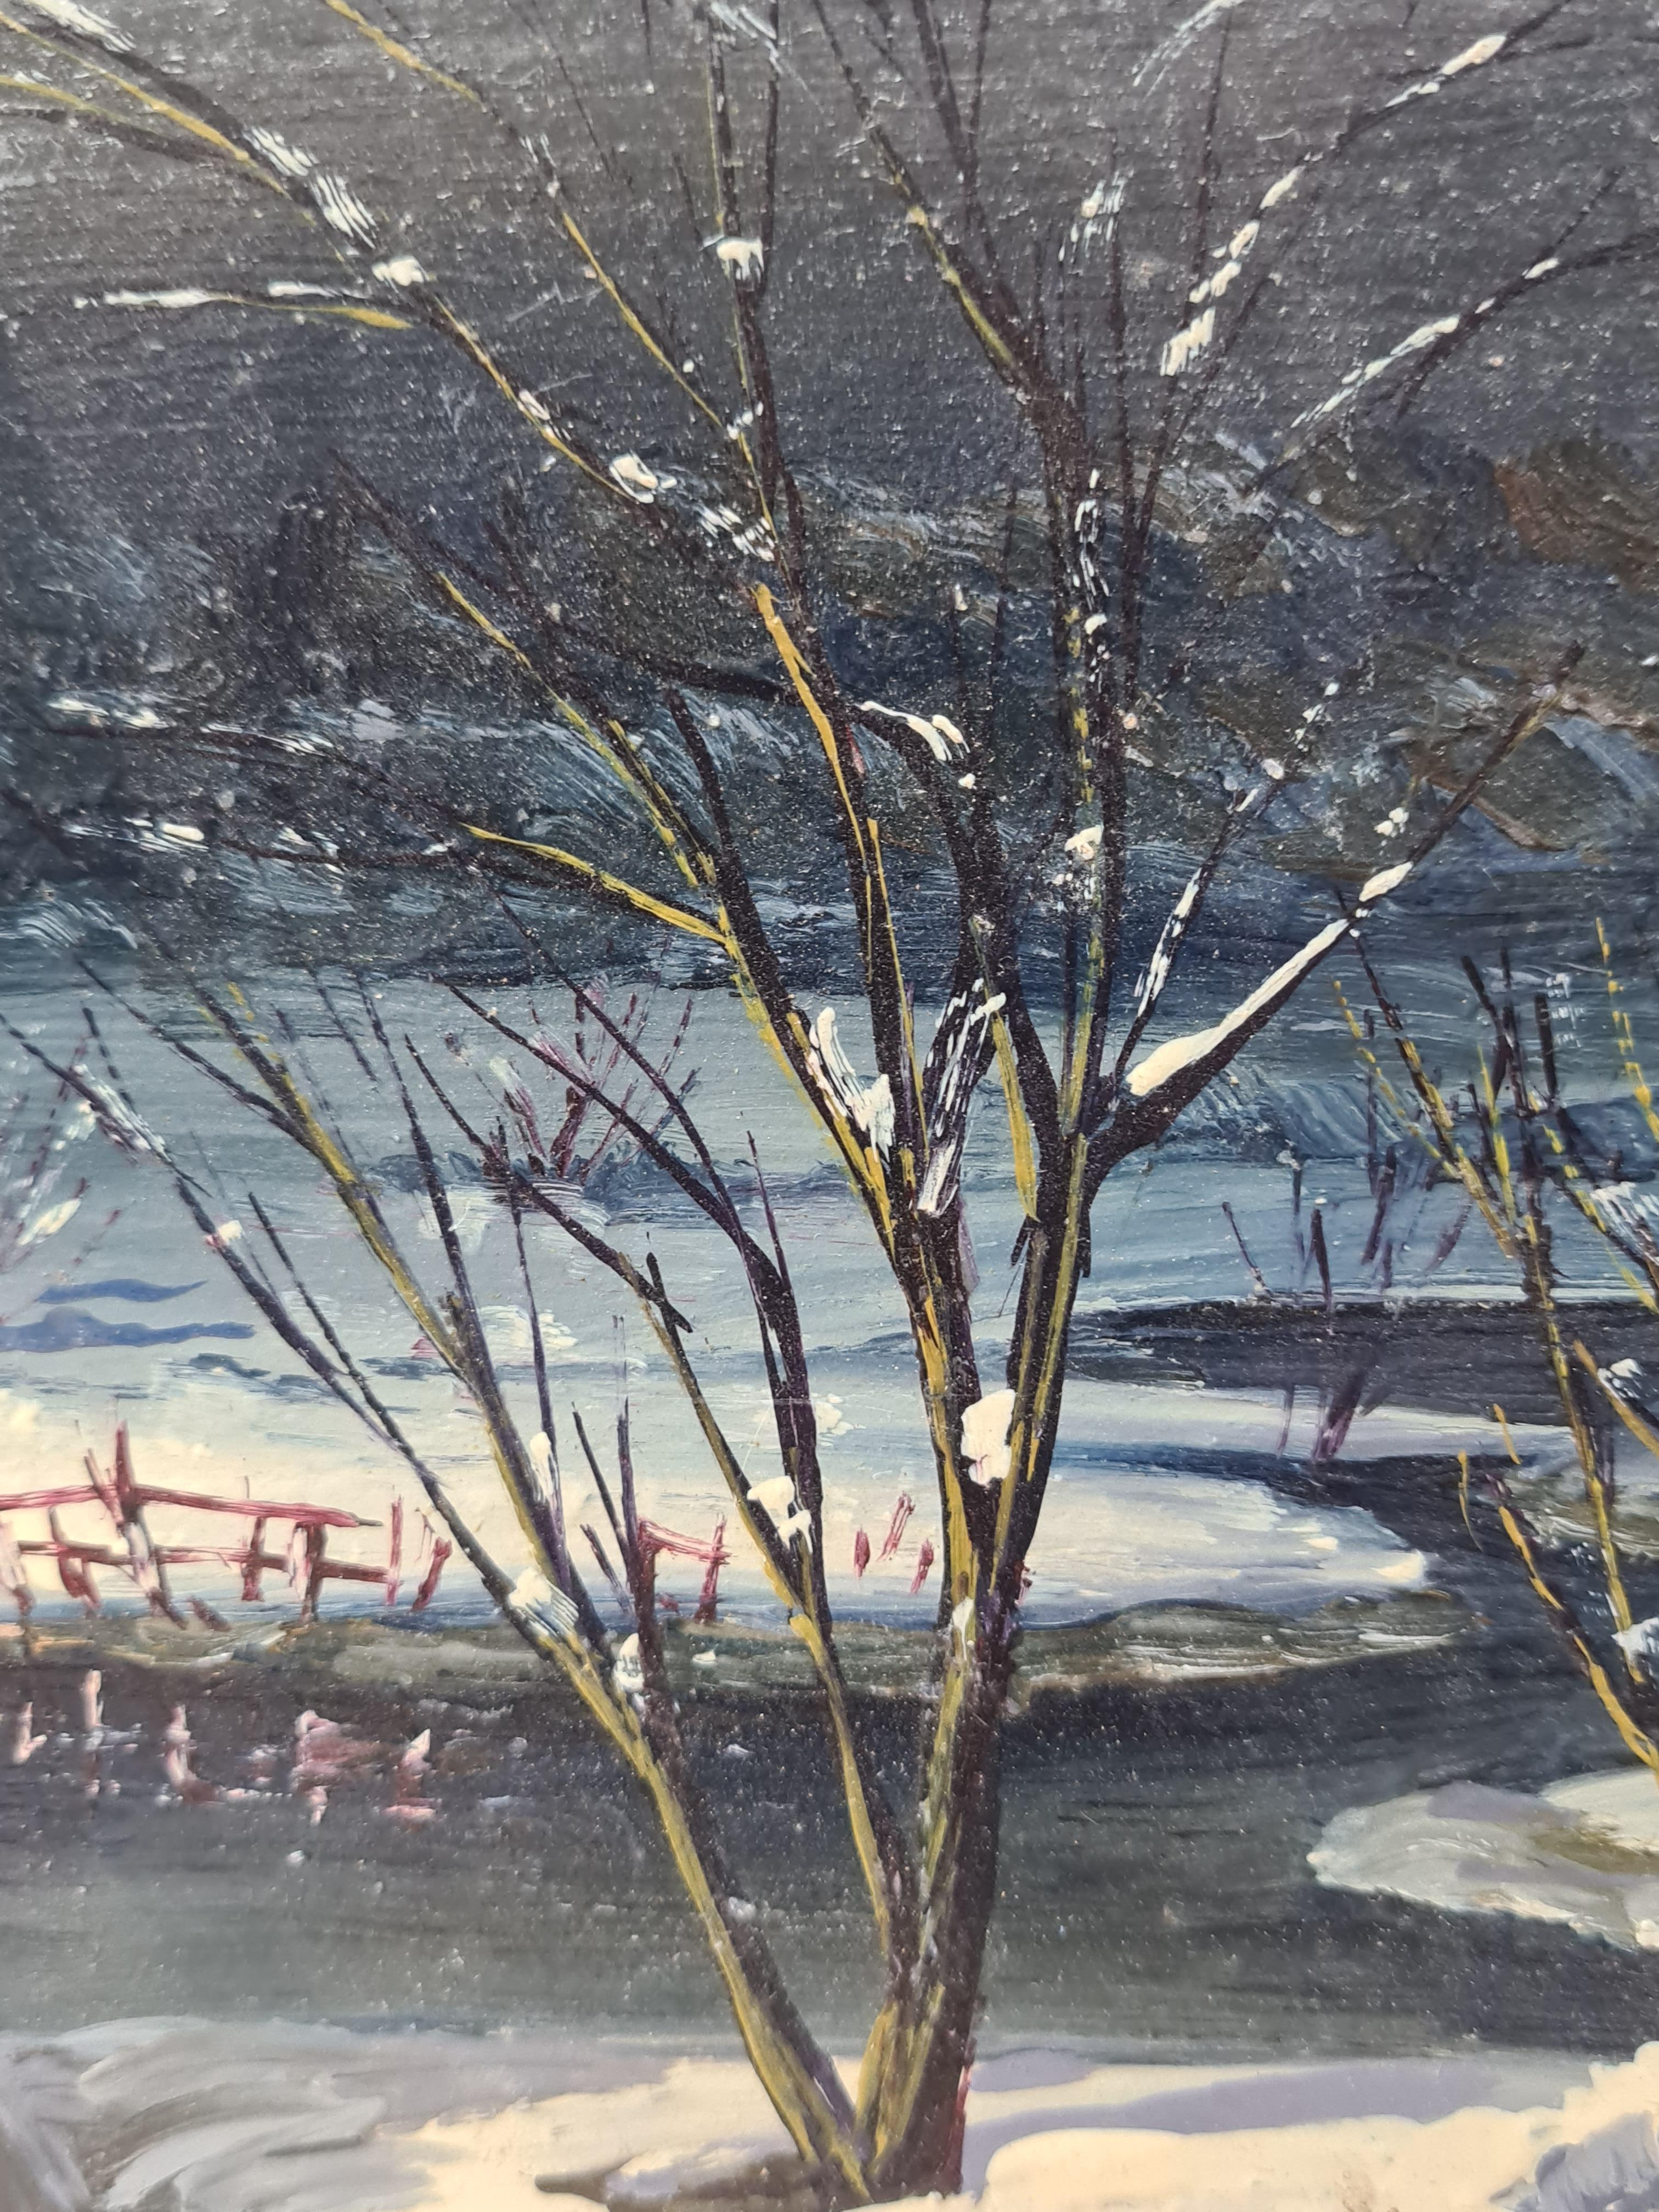 An oil on panel view of a winter snow scene by Boggio. The painting is signed bottom right.

A charming view of a snow scene, a river running under a bridge heavy with snow. A Christmas tree its branches laden with snow, the whole landscape